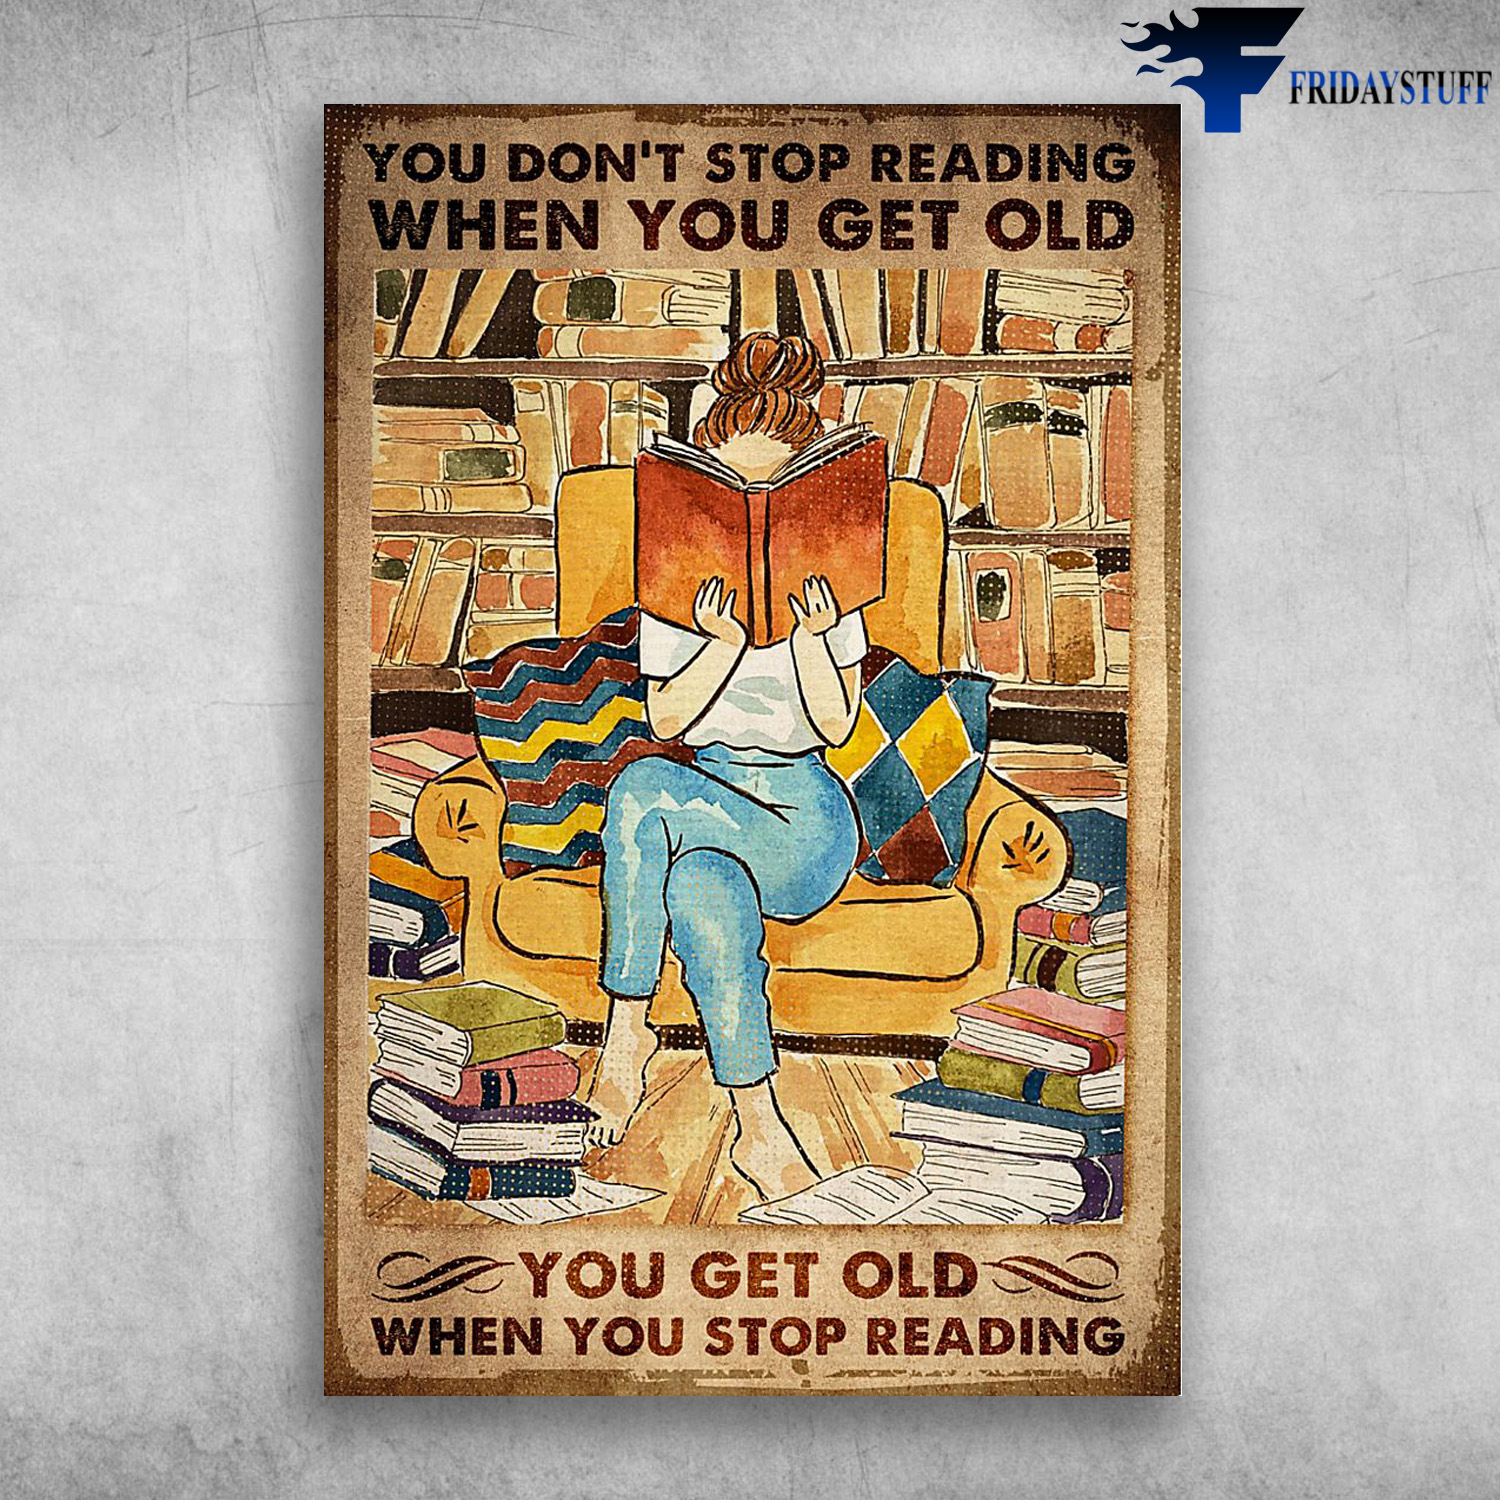 Girl Love Reading Book - You Don't Stop Reading When You Get Old, You Get Old When You Stop Reading